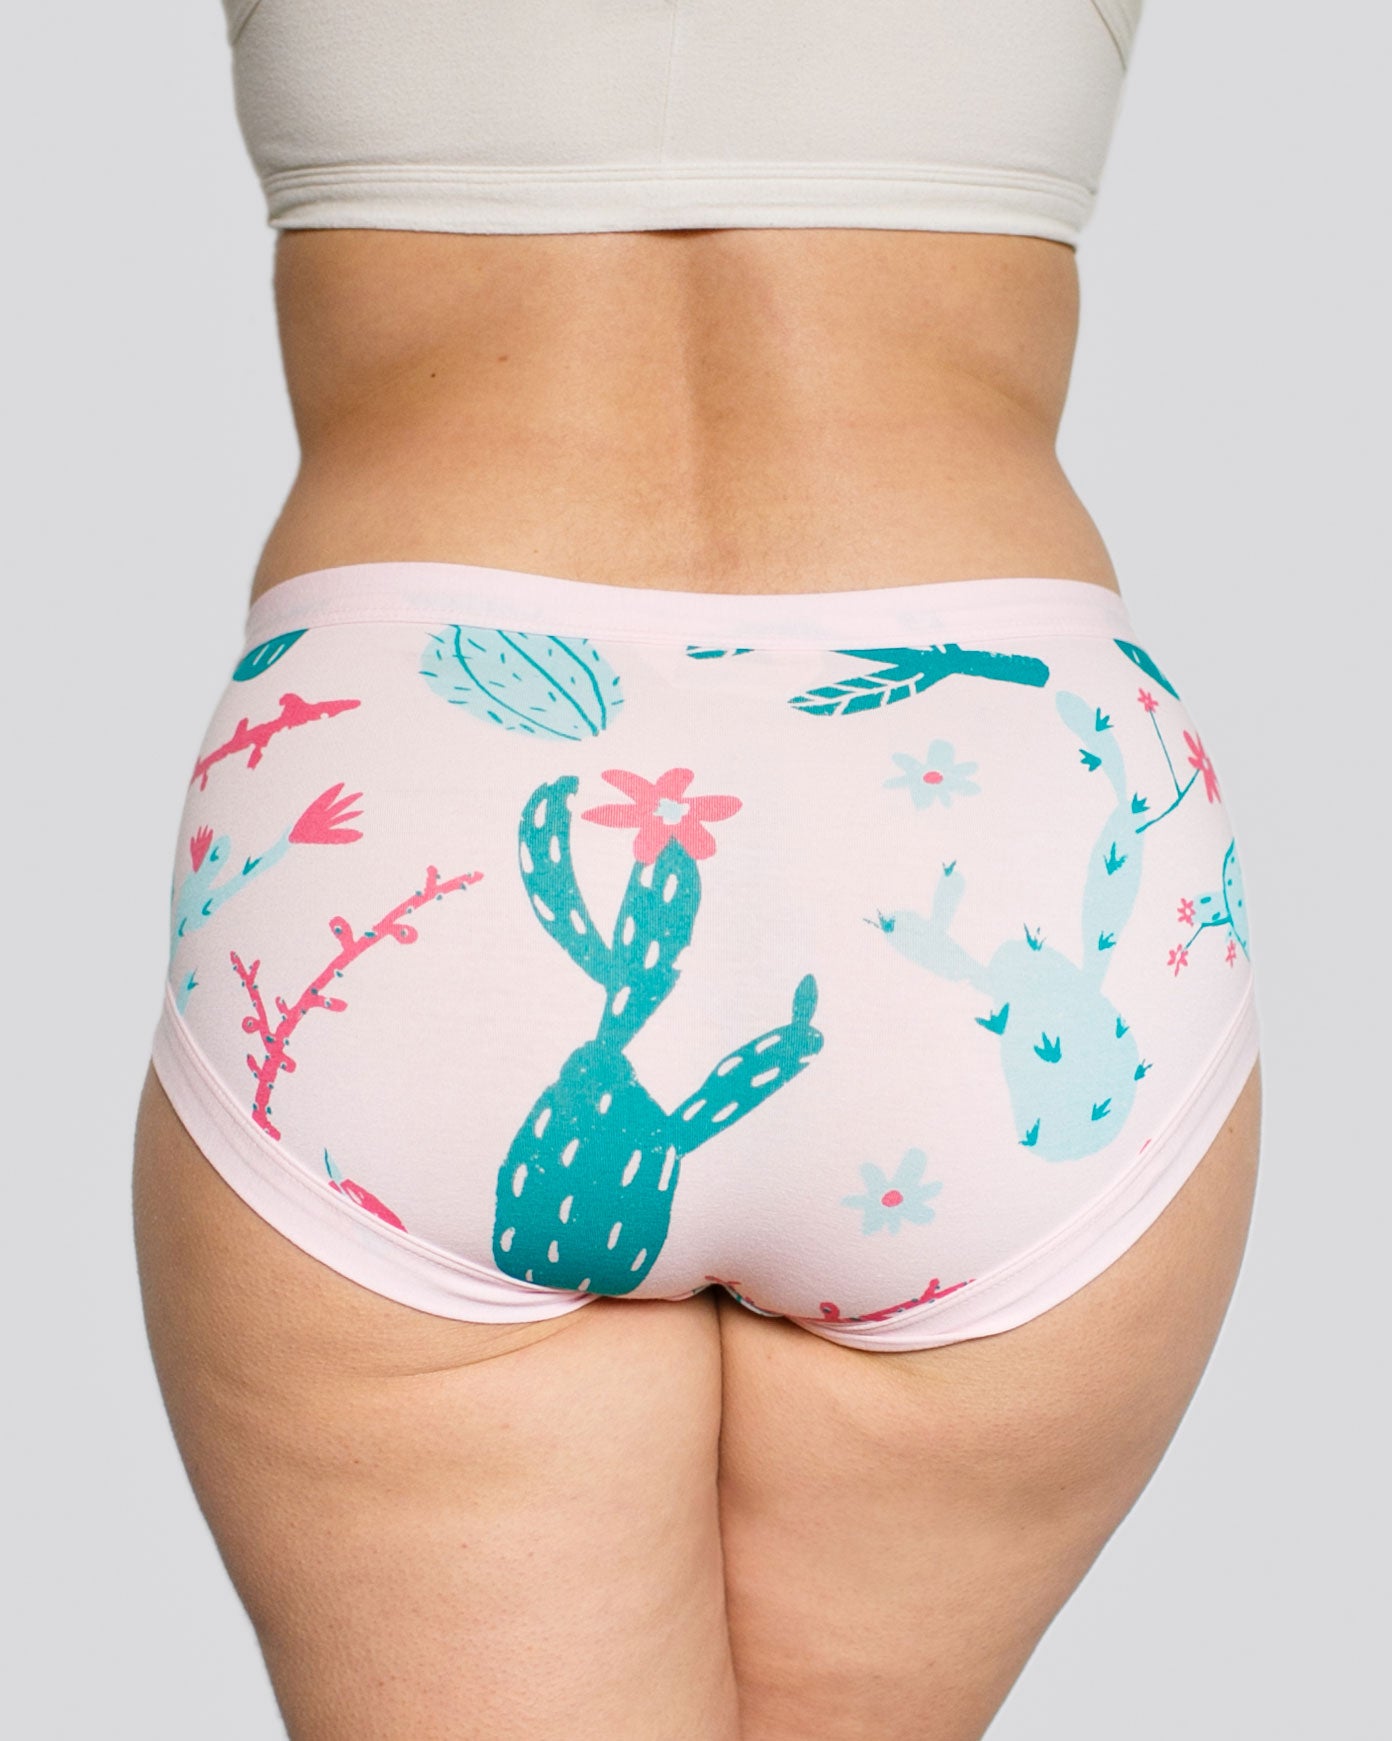 Models bum wearing Thunderpants organic cotton Hipster style underwear in Prickly Cactus print: Perfect Pink with green and pink cacti.